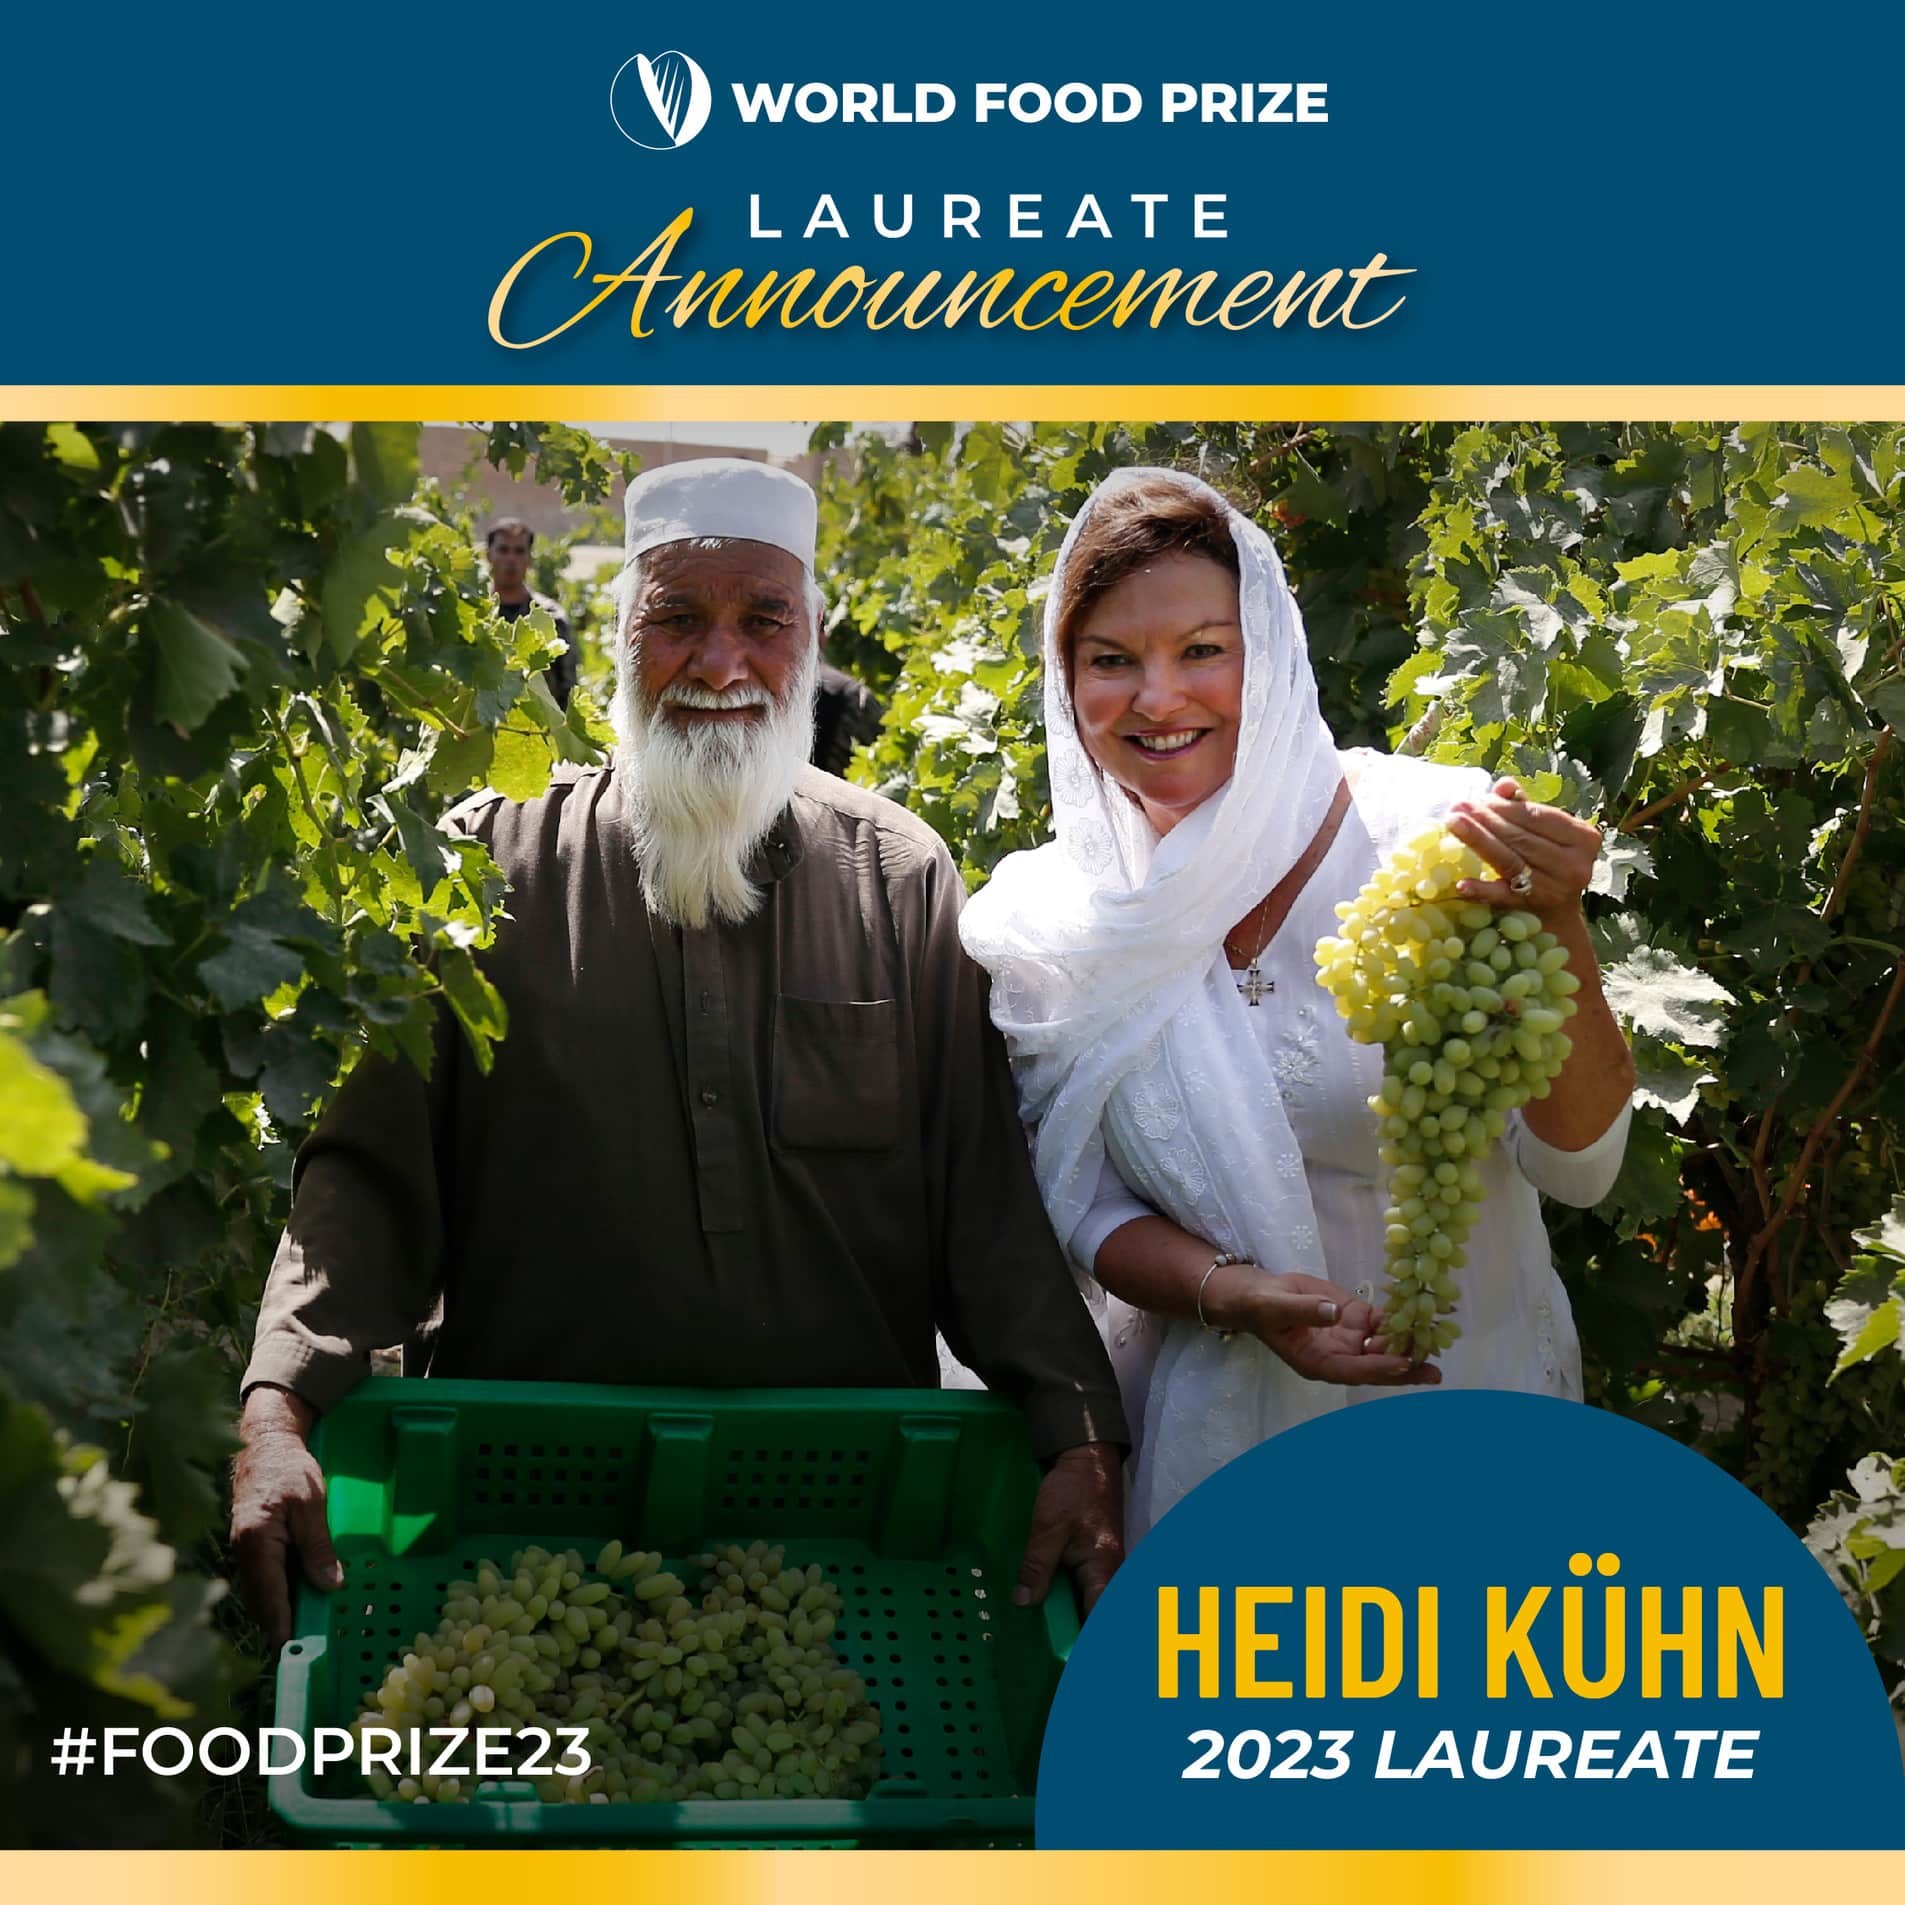 The 2023 World Food Prize Laureate Announced